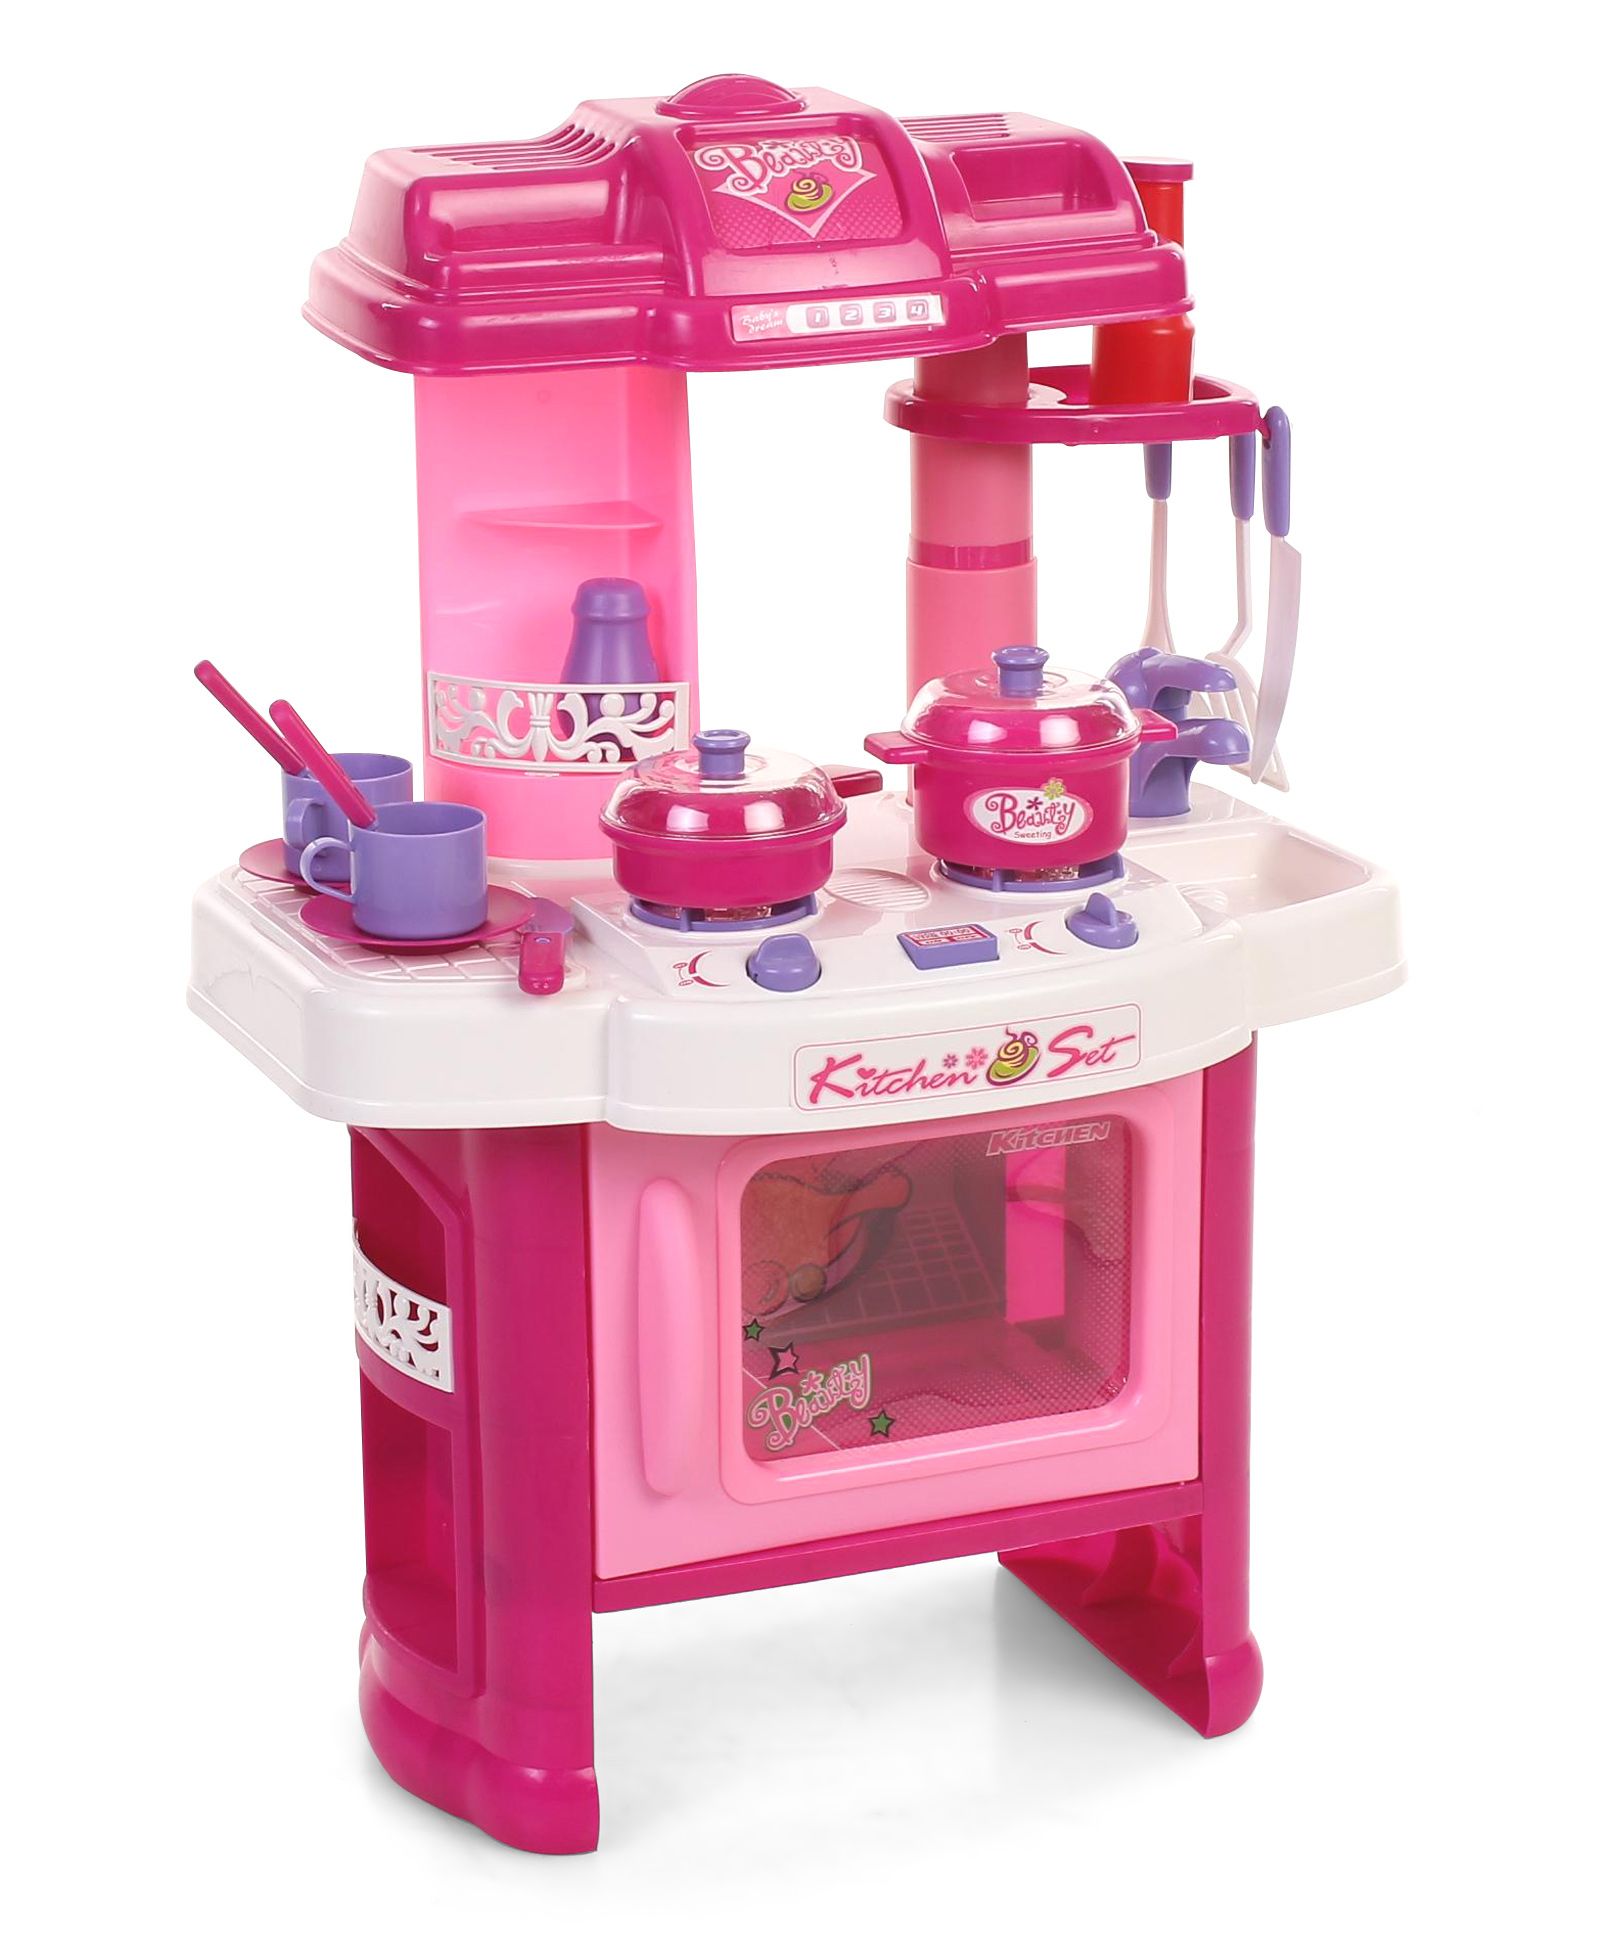 ToyMark Kitchen Set   Pink Online India, Buy Pretend Play Toys for ...